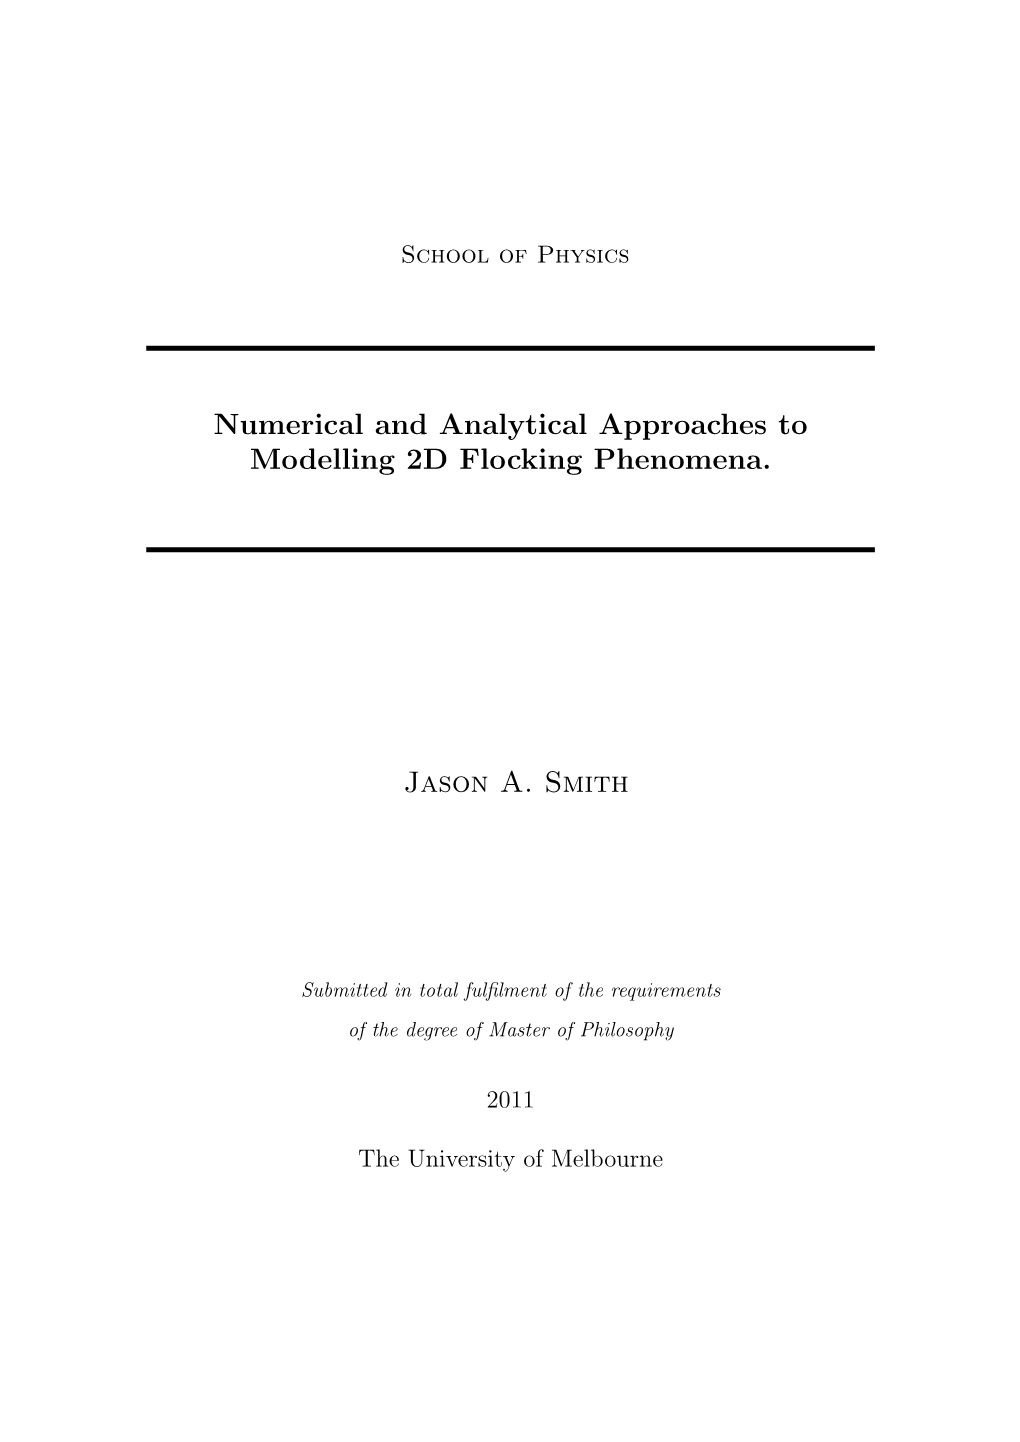 Numerical and Analytical Approaches to Modelling 2D Flocking Phenomena